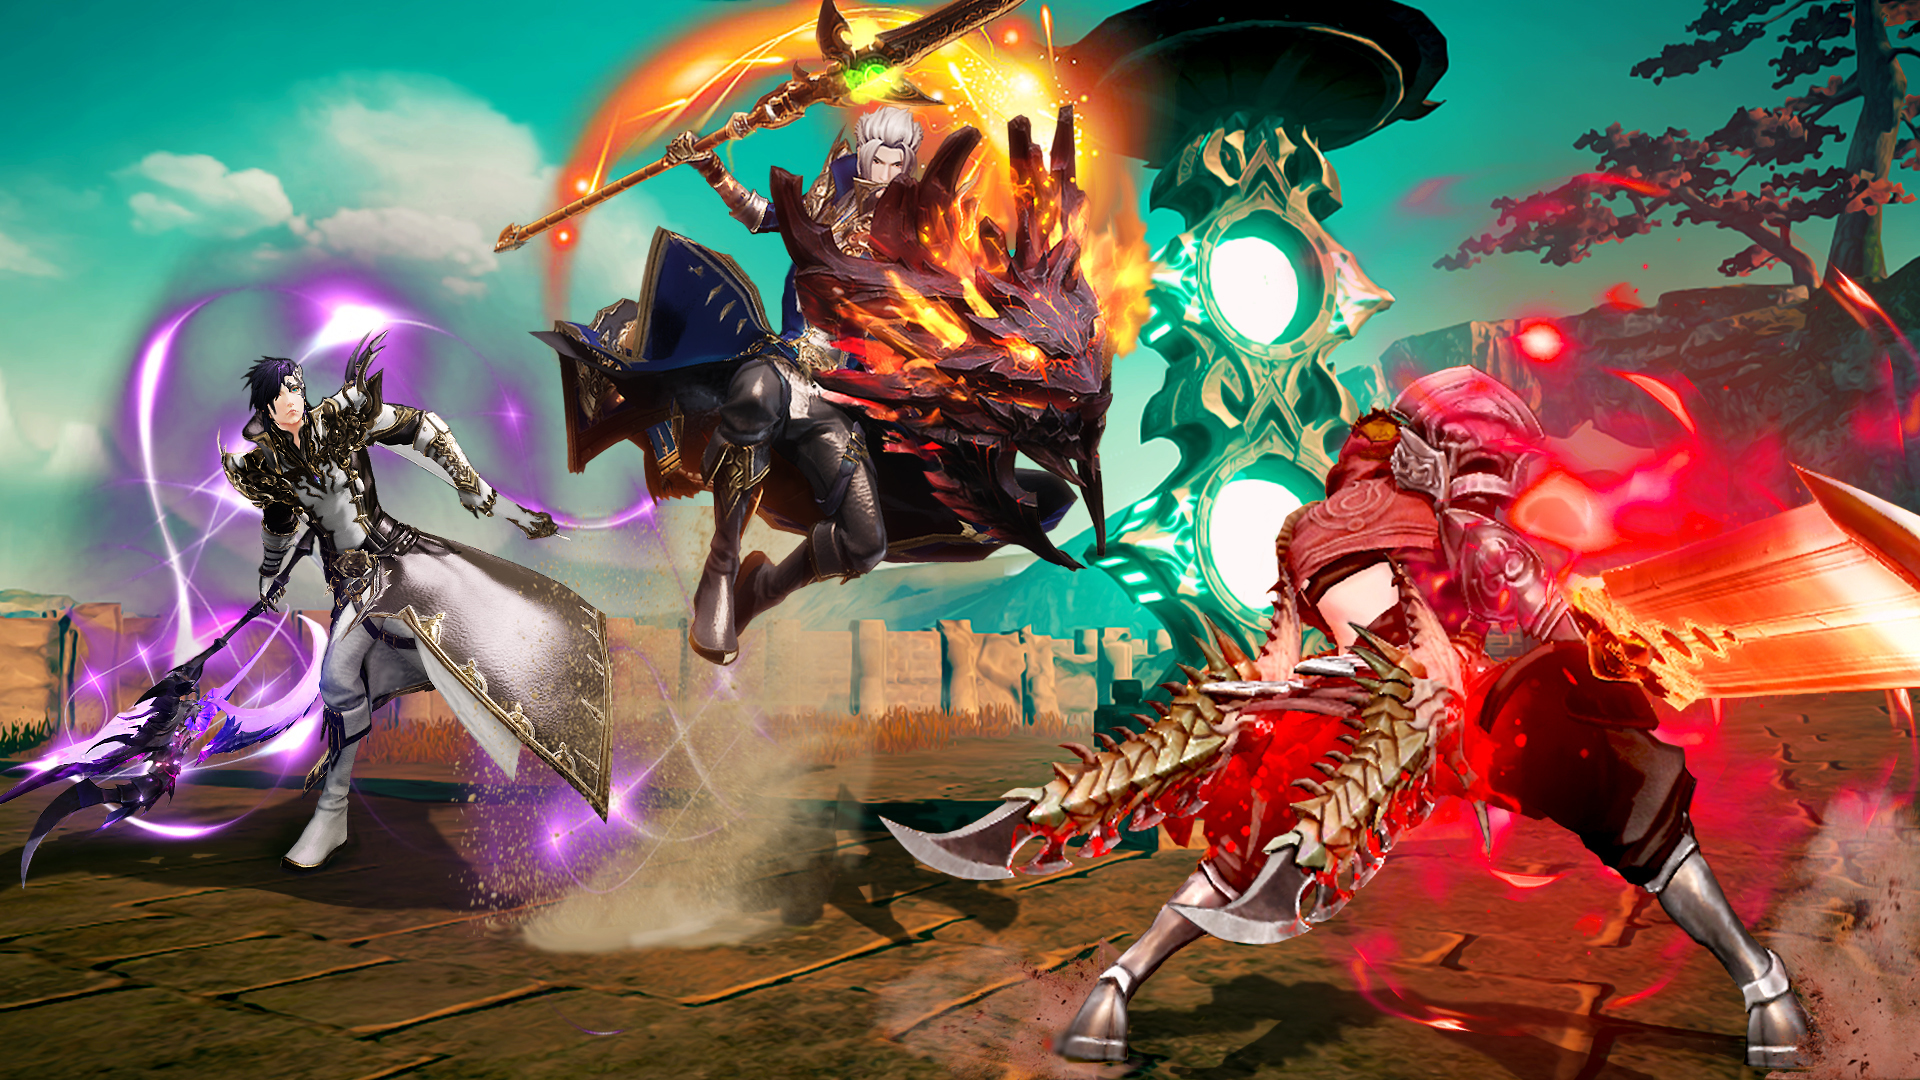 Steam Revelation Online New Sulan Loading Screen Contest Winners Announced